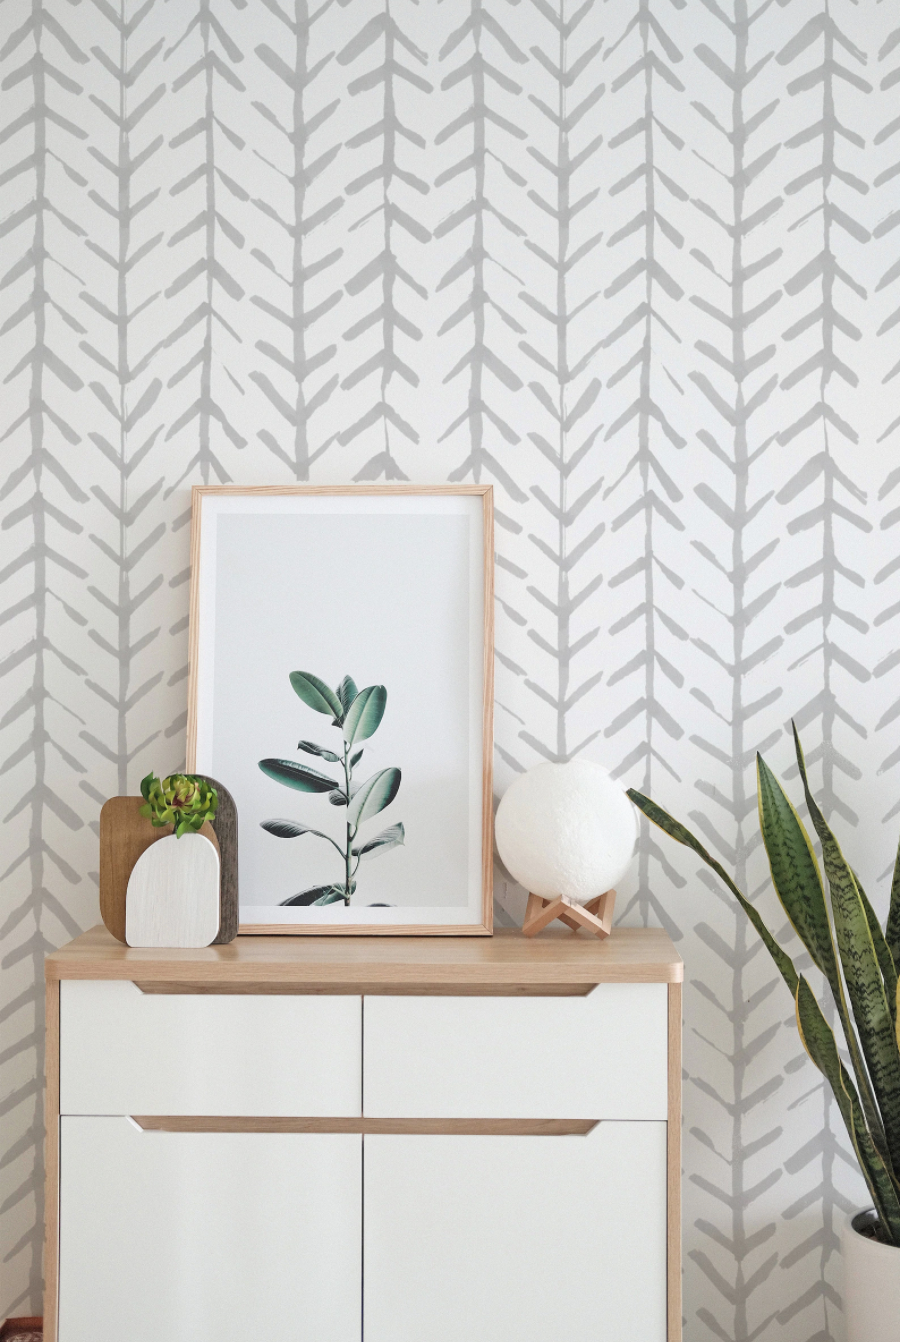 A styled room with the Hand Painted Chevron Arrow Wallpaper adorning the wall, complemented by a modern dresser, a framed botanical print, a wooden heart sculpture, and a spherical textured lamp, creating a harmonious blend of contemporary and handmade aesthetics